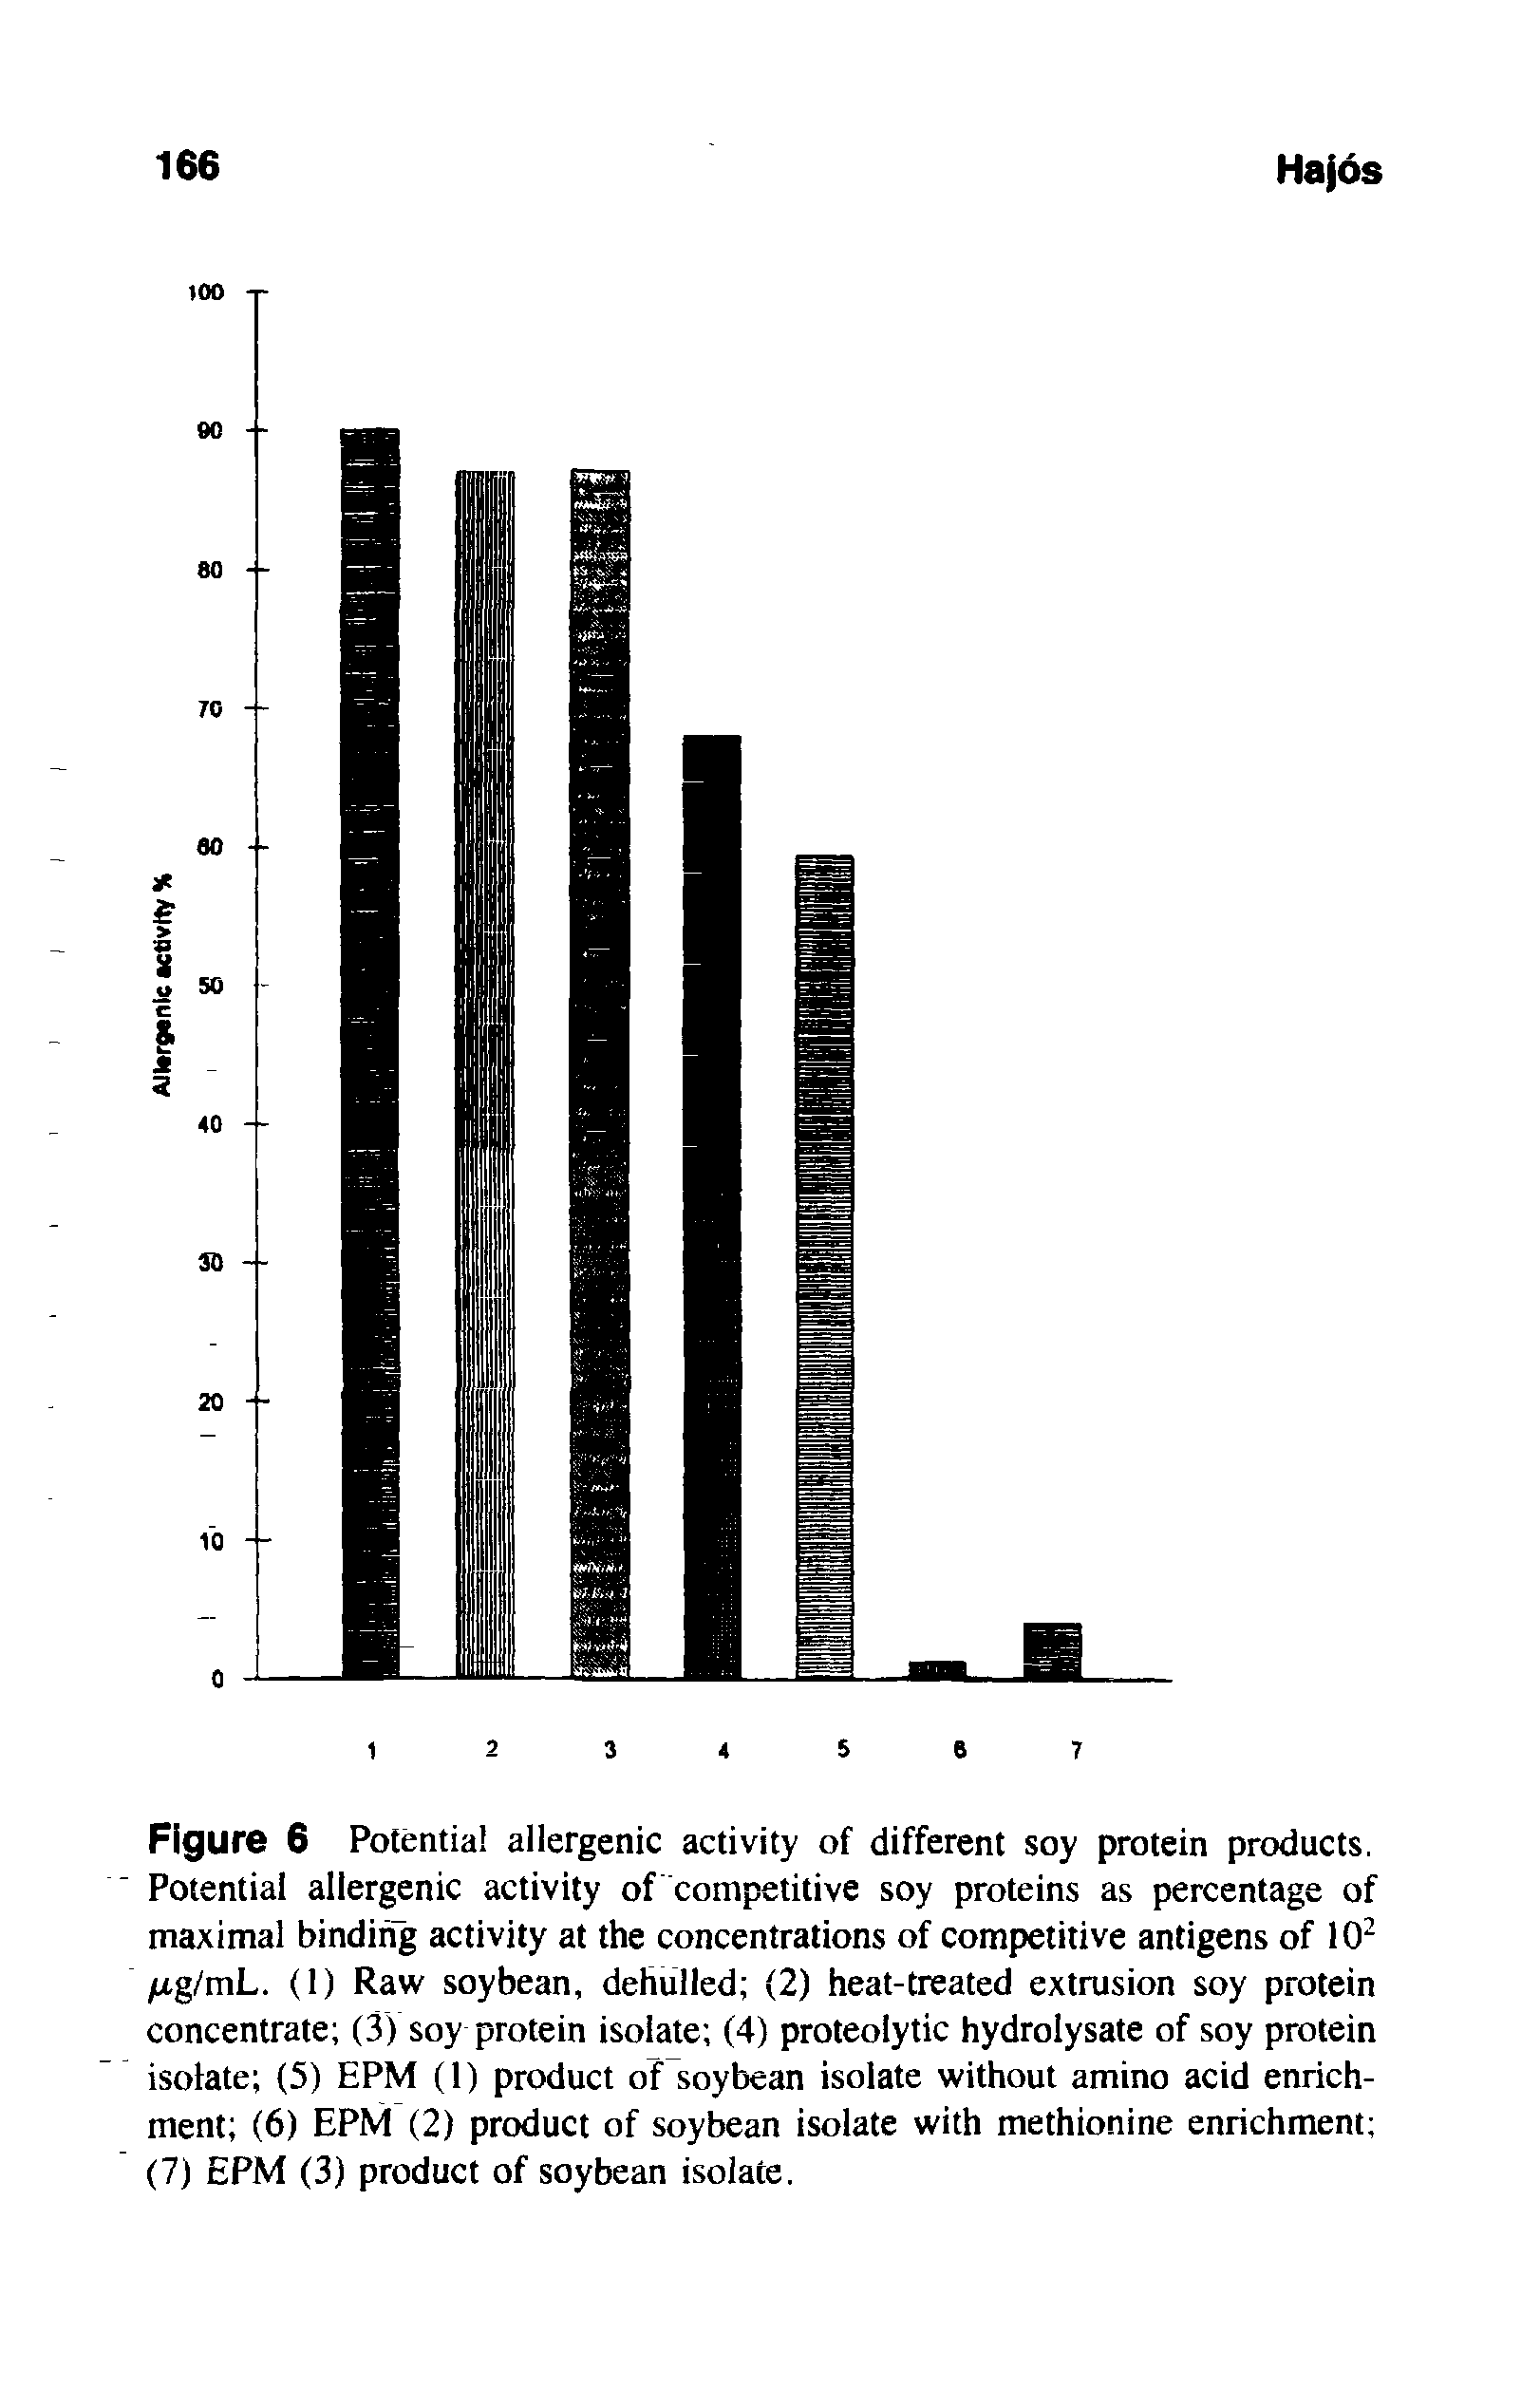 Figure 6 Potential allergenic activity of different soy protein products. Potential allergenic activity of competitive soy proteins as percentage of maximal binding activity at the concentrations of competitive antigens of 102 /Ltg/mL. (1) Raw soybean, dehulled (2) heat-treated extrusion soy protein concentrate (3) soy protein isolate (4) proteolytic hydrolysate of soy protein isolate (5) EPM (1) product of soybean isolate without amino acid enrichment (6) EPM (2) product of soybean isolate with methionine enrichment (7) EPM (3) product of soybean isolate.